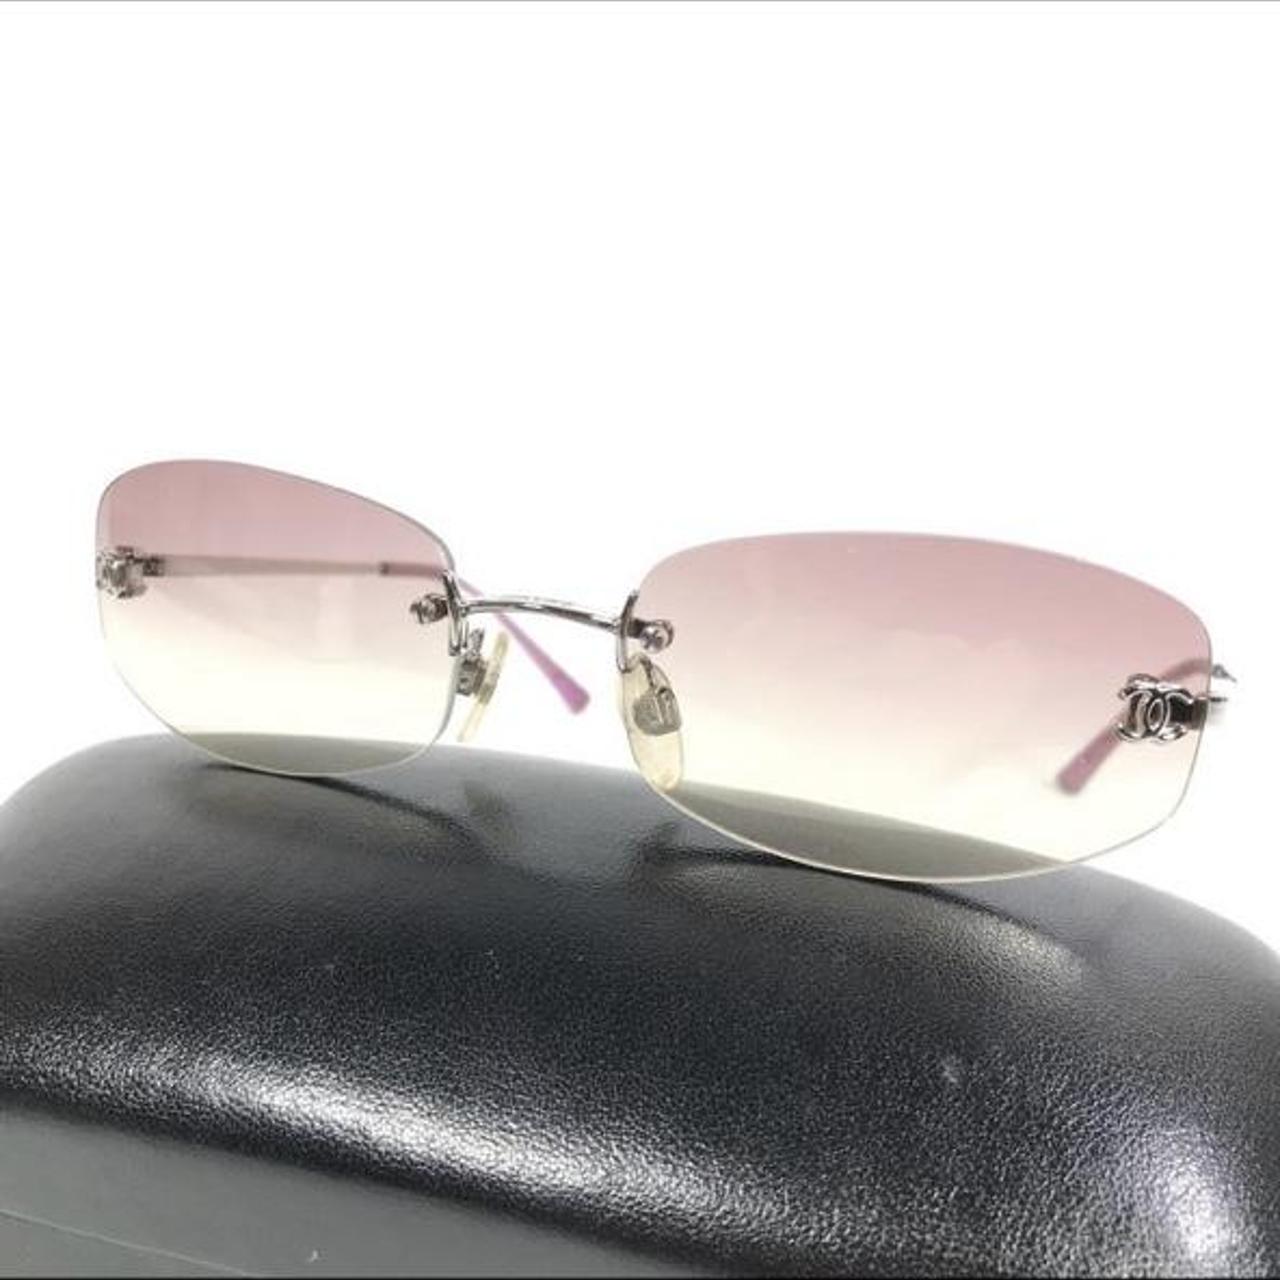 REPOP authentic Chanel sunglasses. doesn't come with - Depop